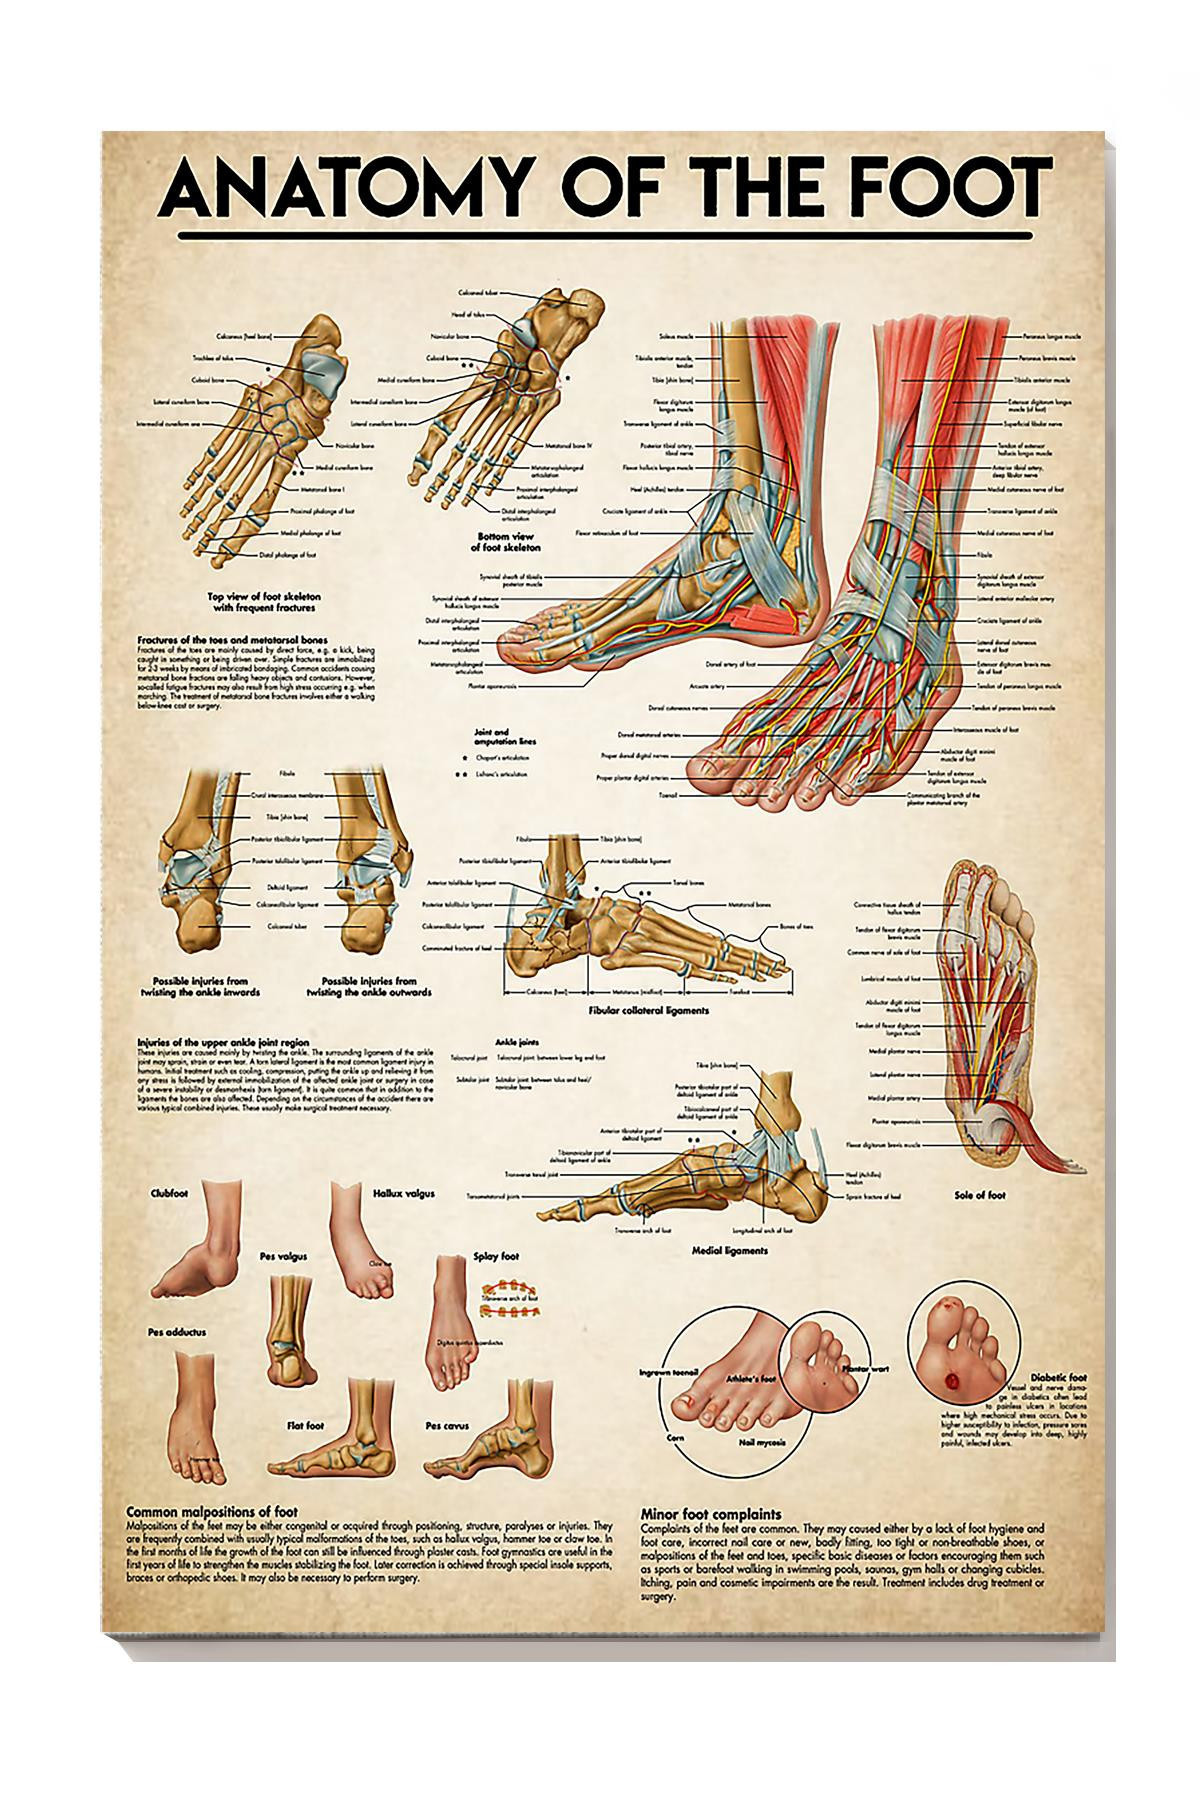 Anatomy Of The Foot Medical Knowledge For Doctor Surgeon Hospital Clinic Decor Canvas Gallery Painting Wrapped Canvas Framed Prints, Canvas Paintings Wrapped Canvas 8x10